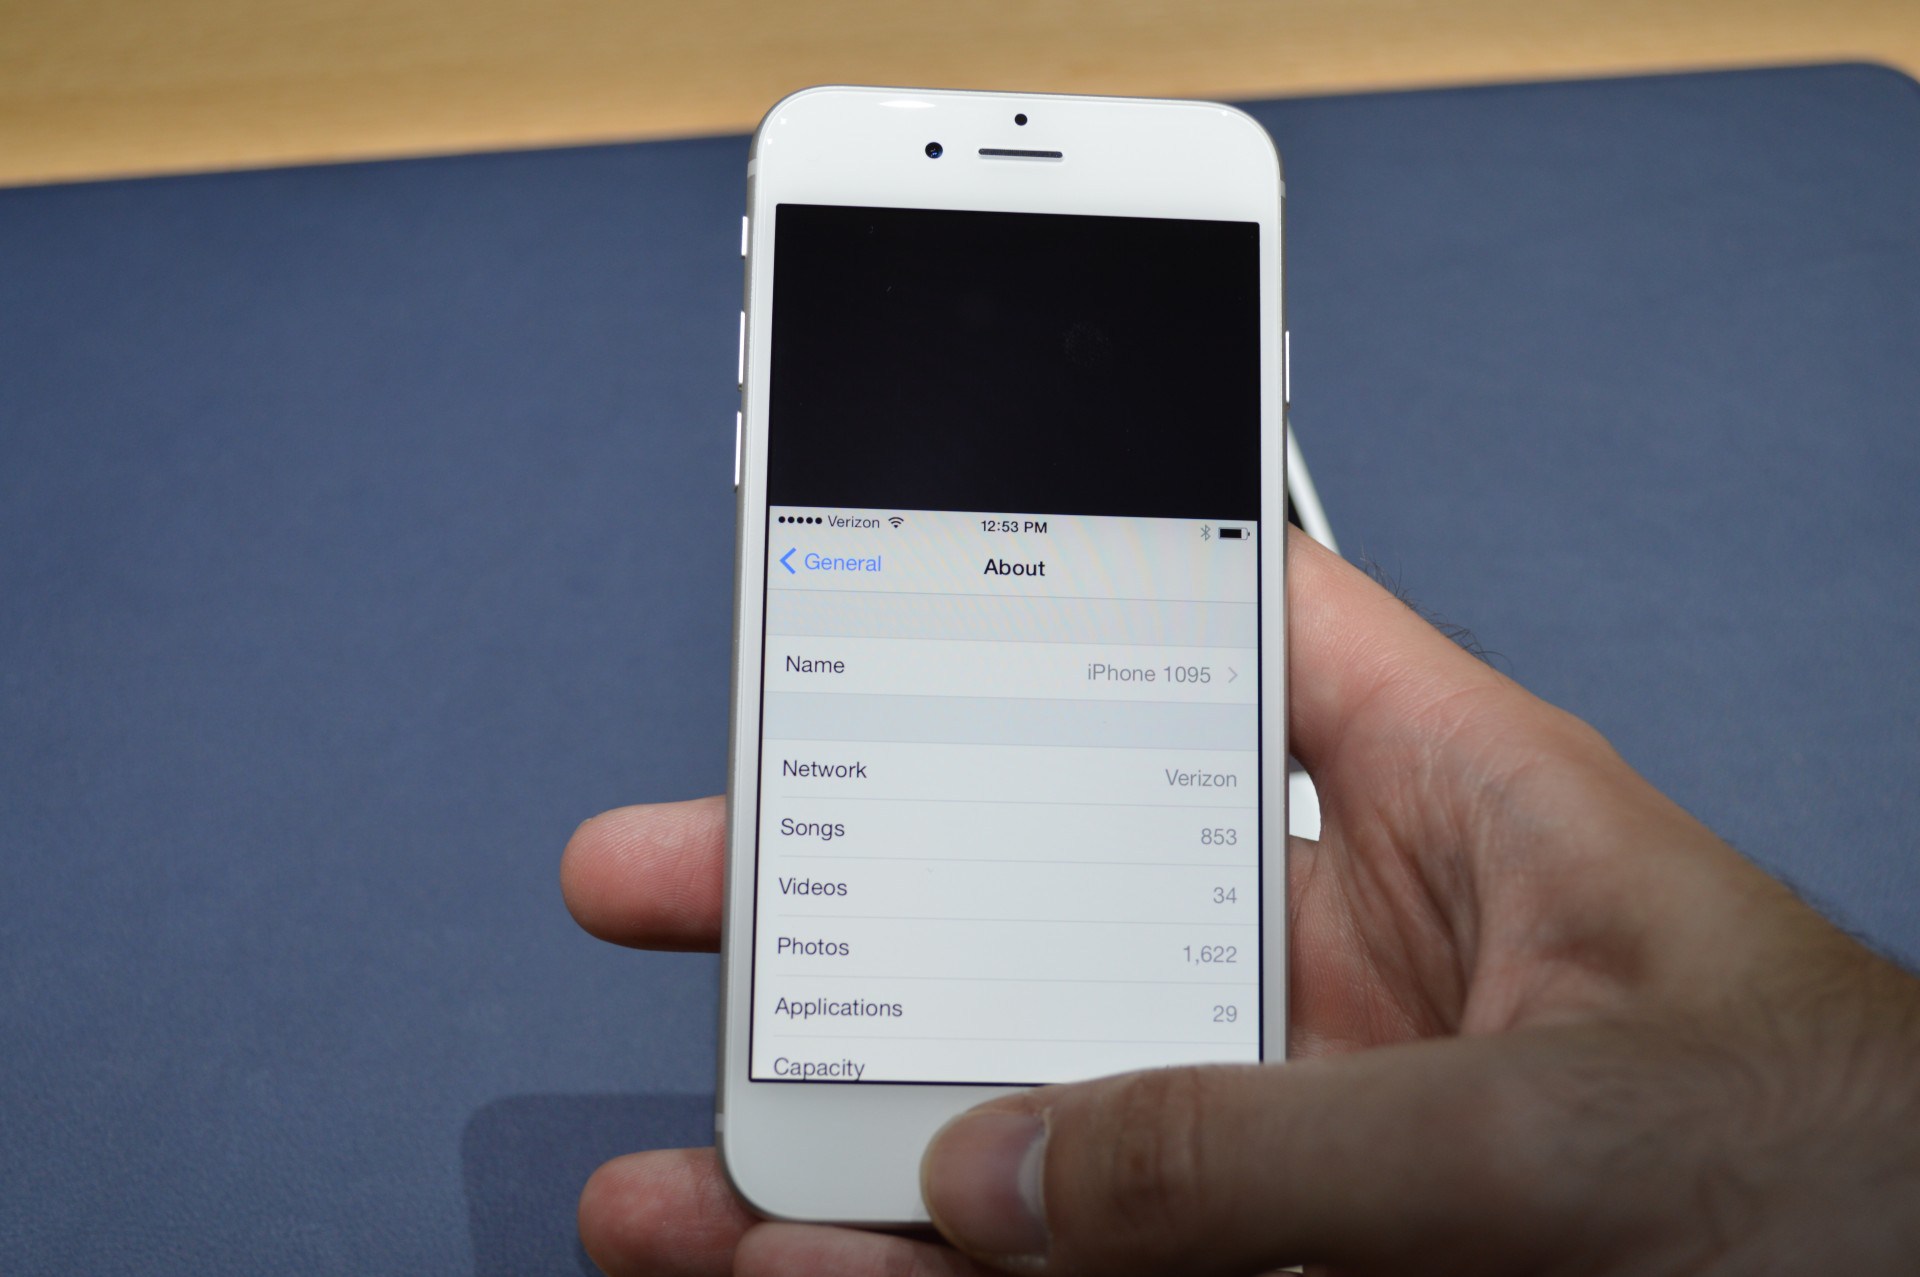 Demostración de Reachability. [Fuente](http://arstechnica.com/apple/2014/09/hands-on-with-the-iphone-6-and-6-plus-apples-first-crack-at-big-phones/)